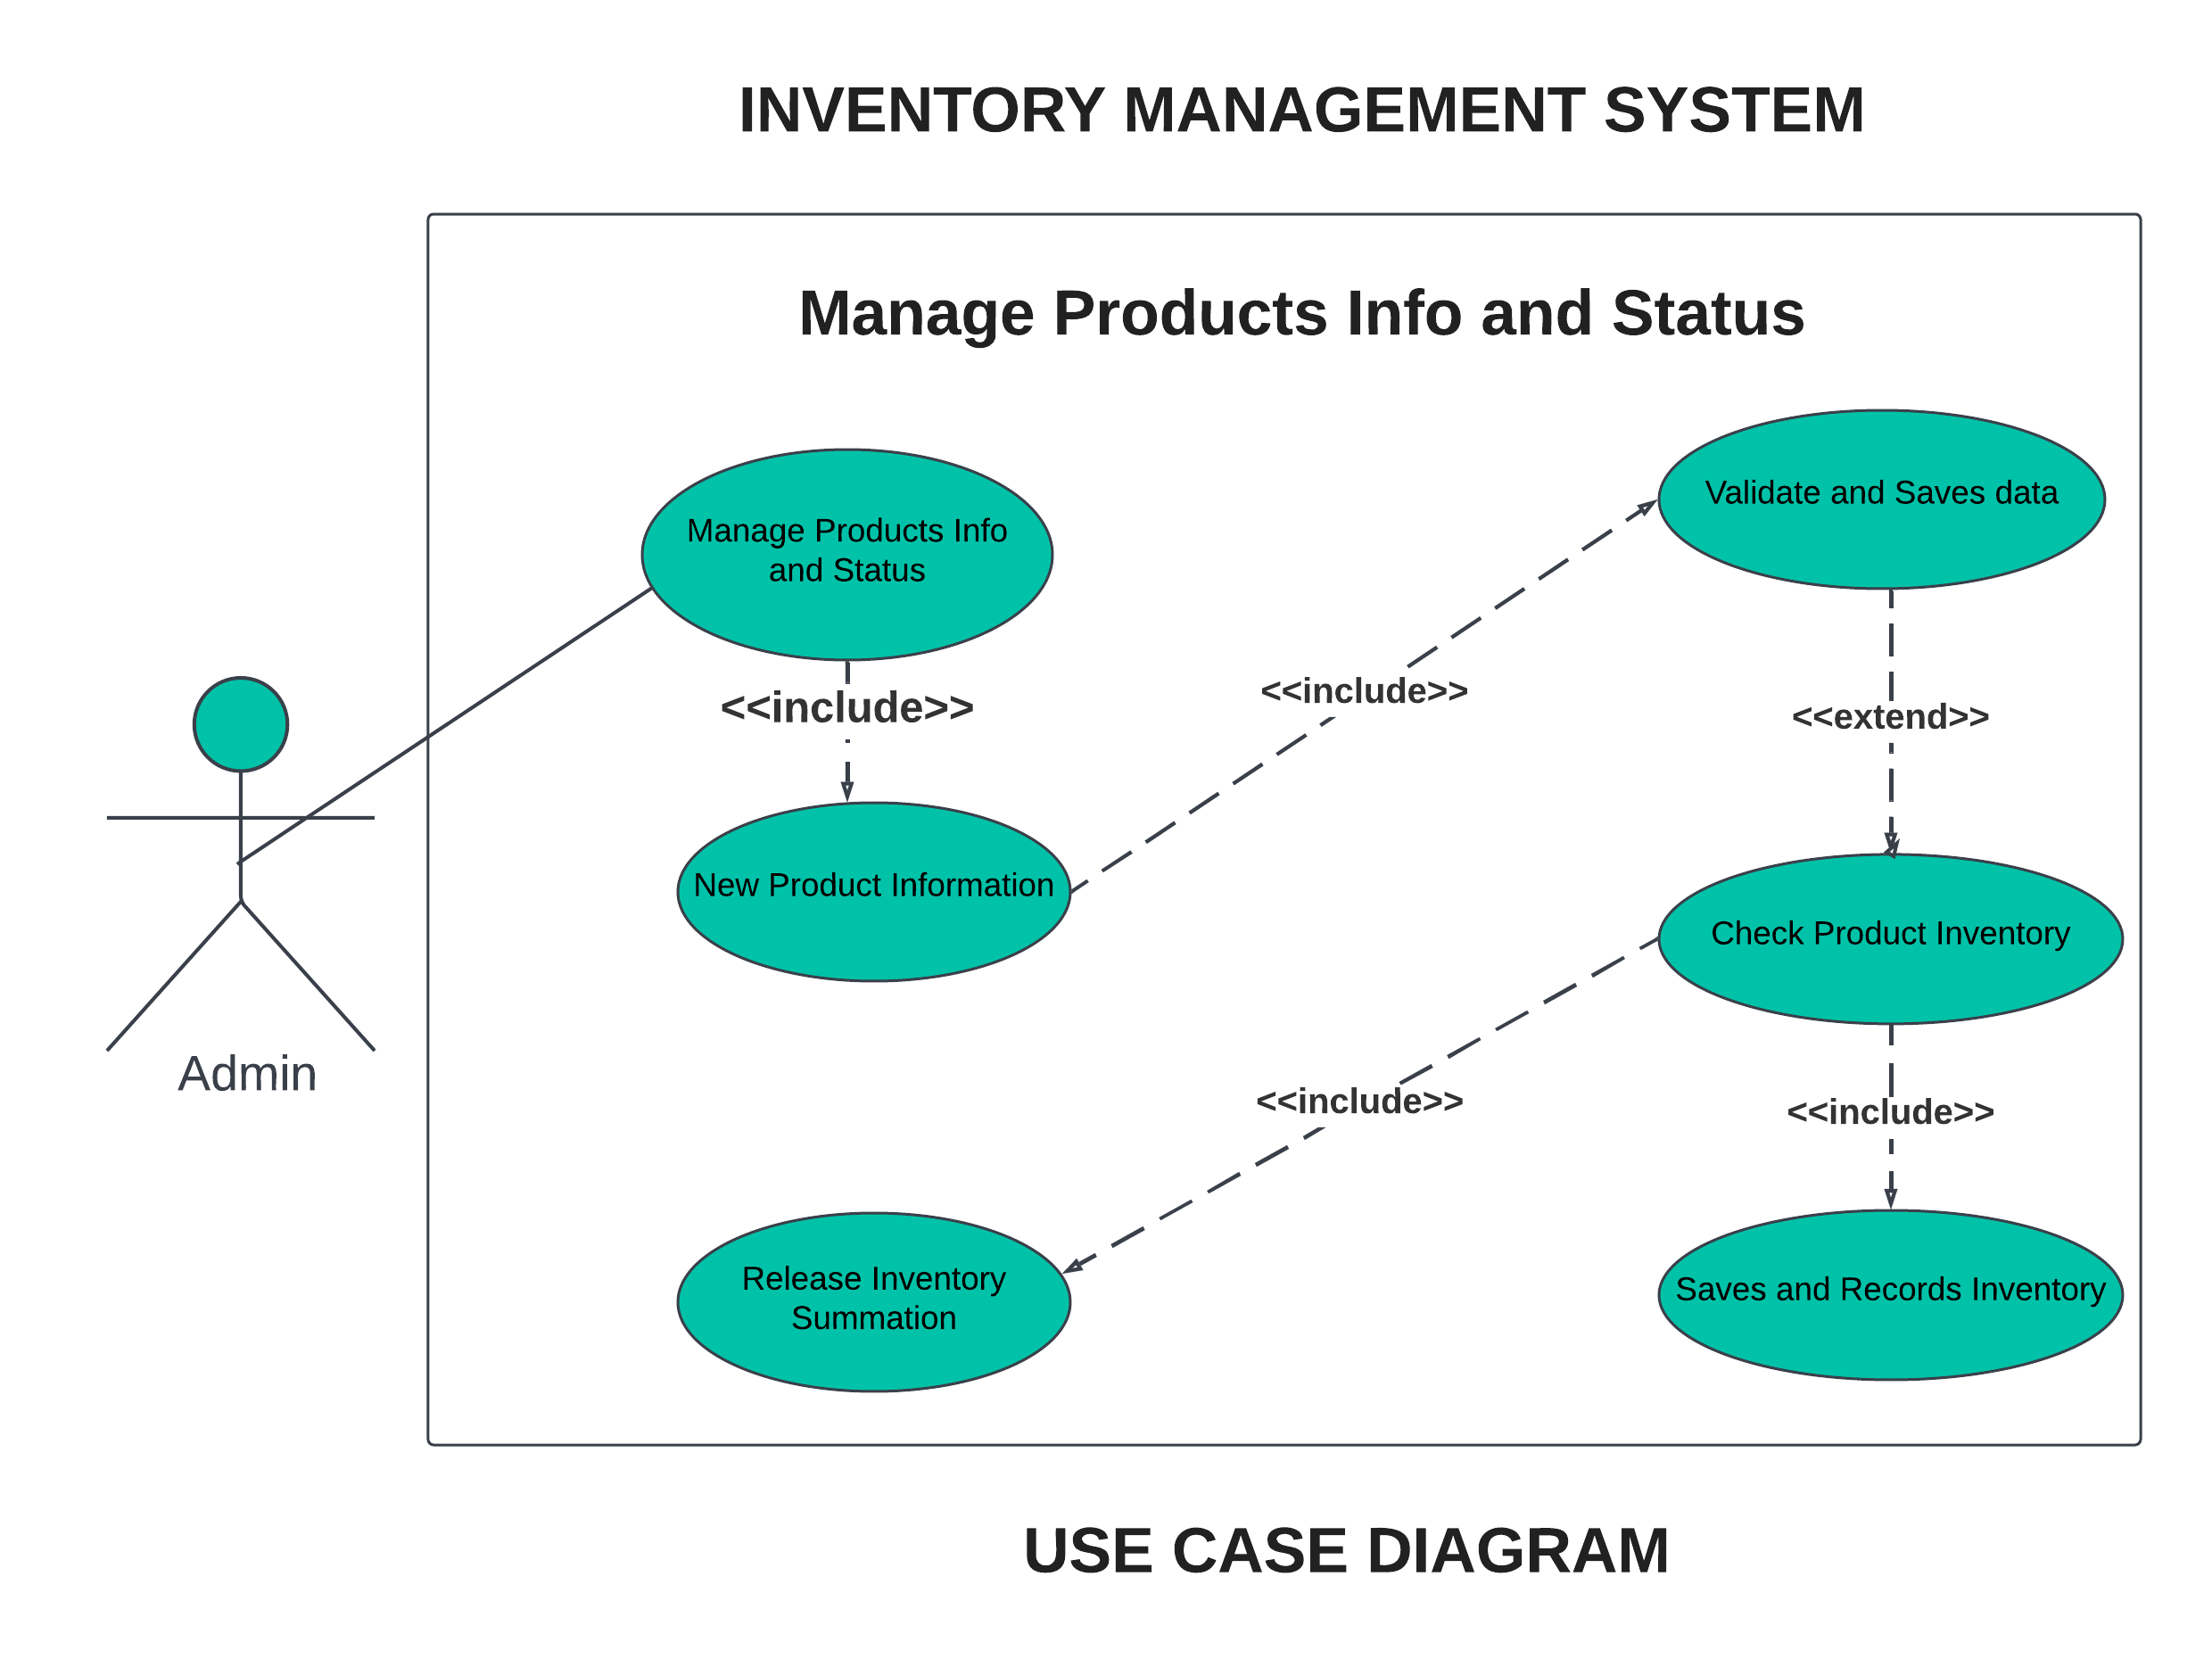 MANAGE PRODUCT INFO AND STATUS USE CASE DIAGRAM